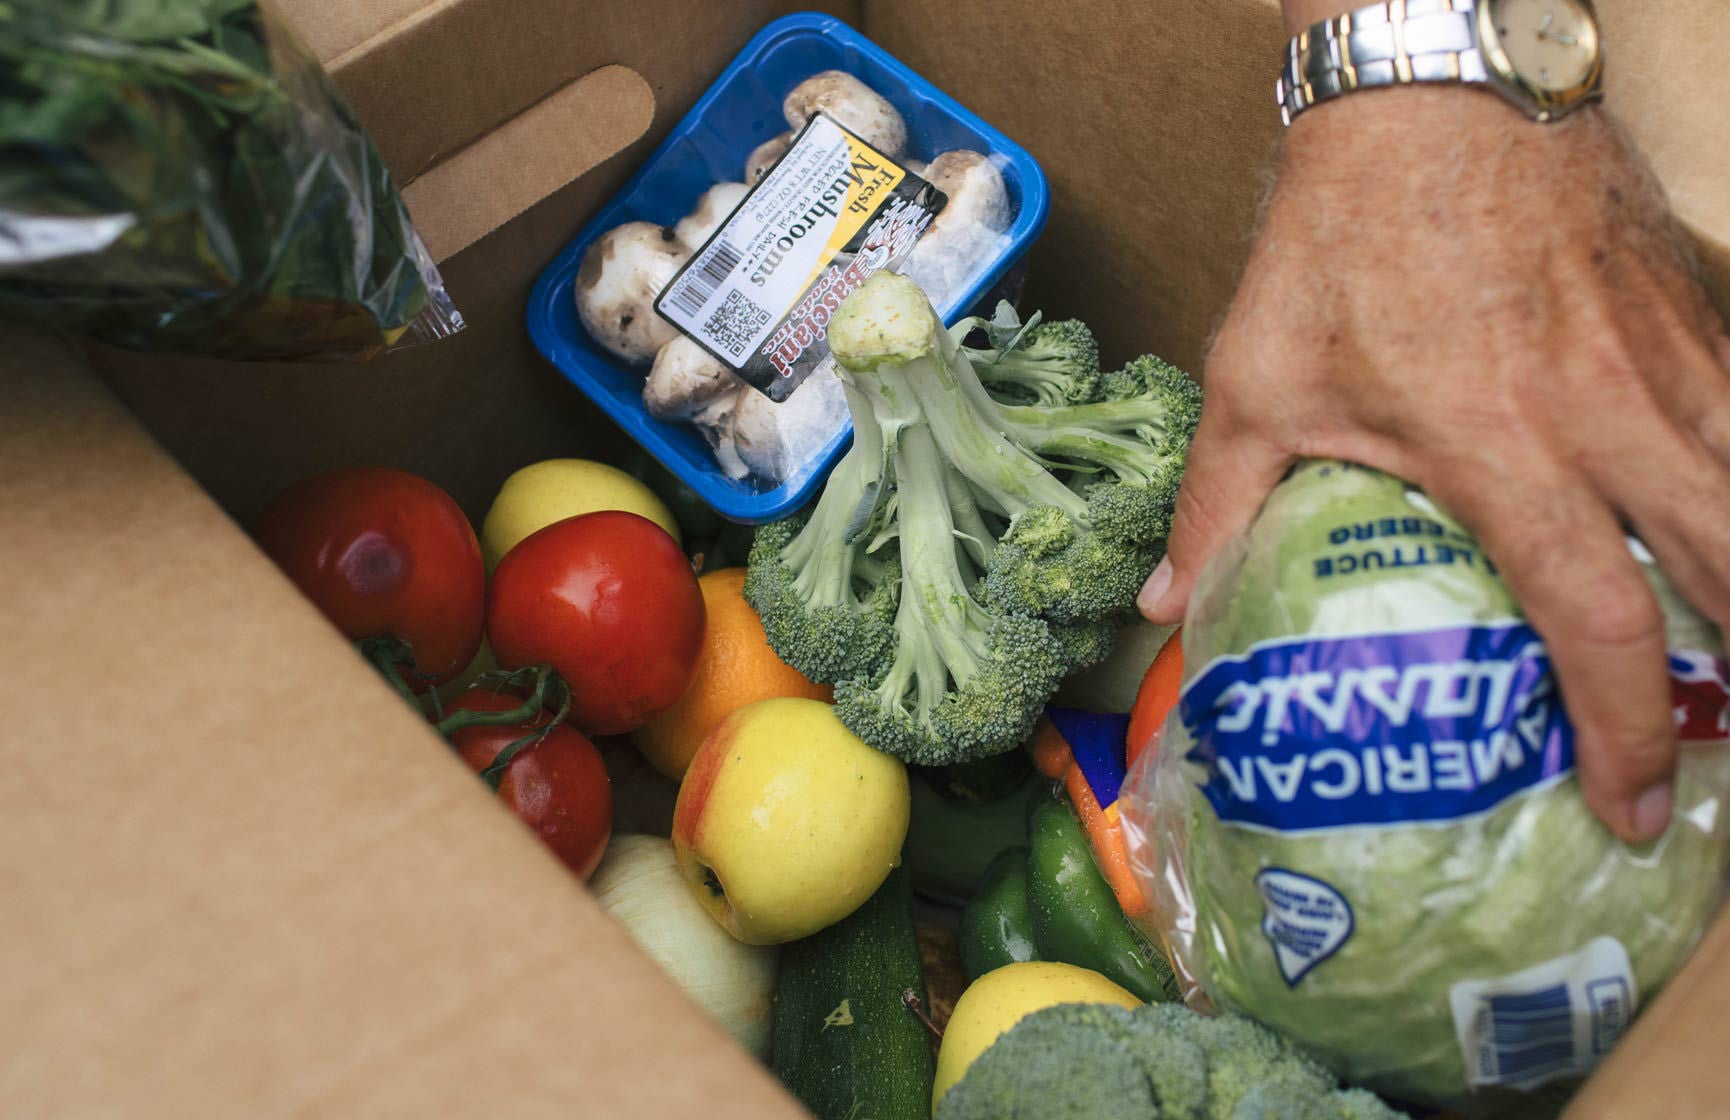 Hand reaches into an open box with a variety of fresh produce.